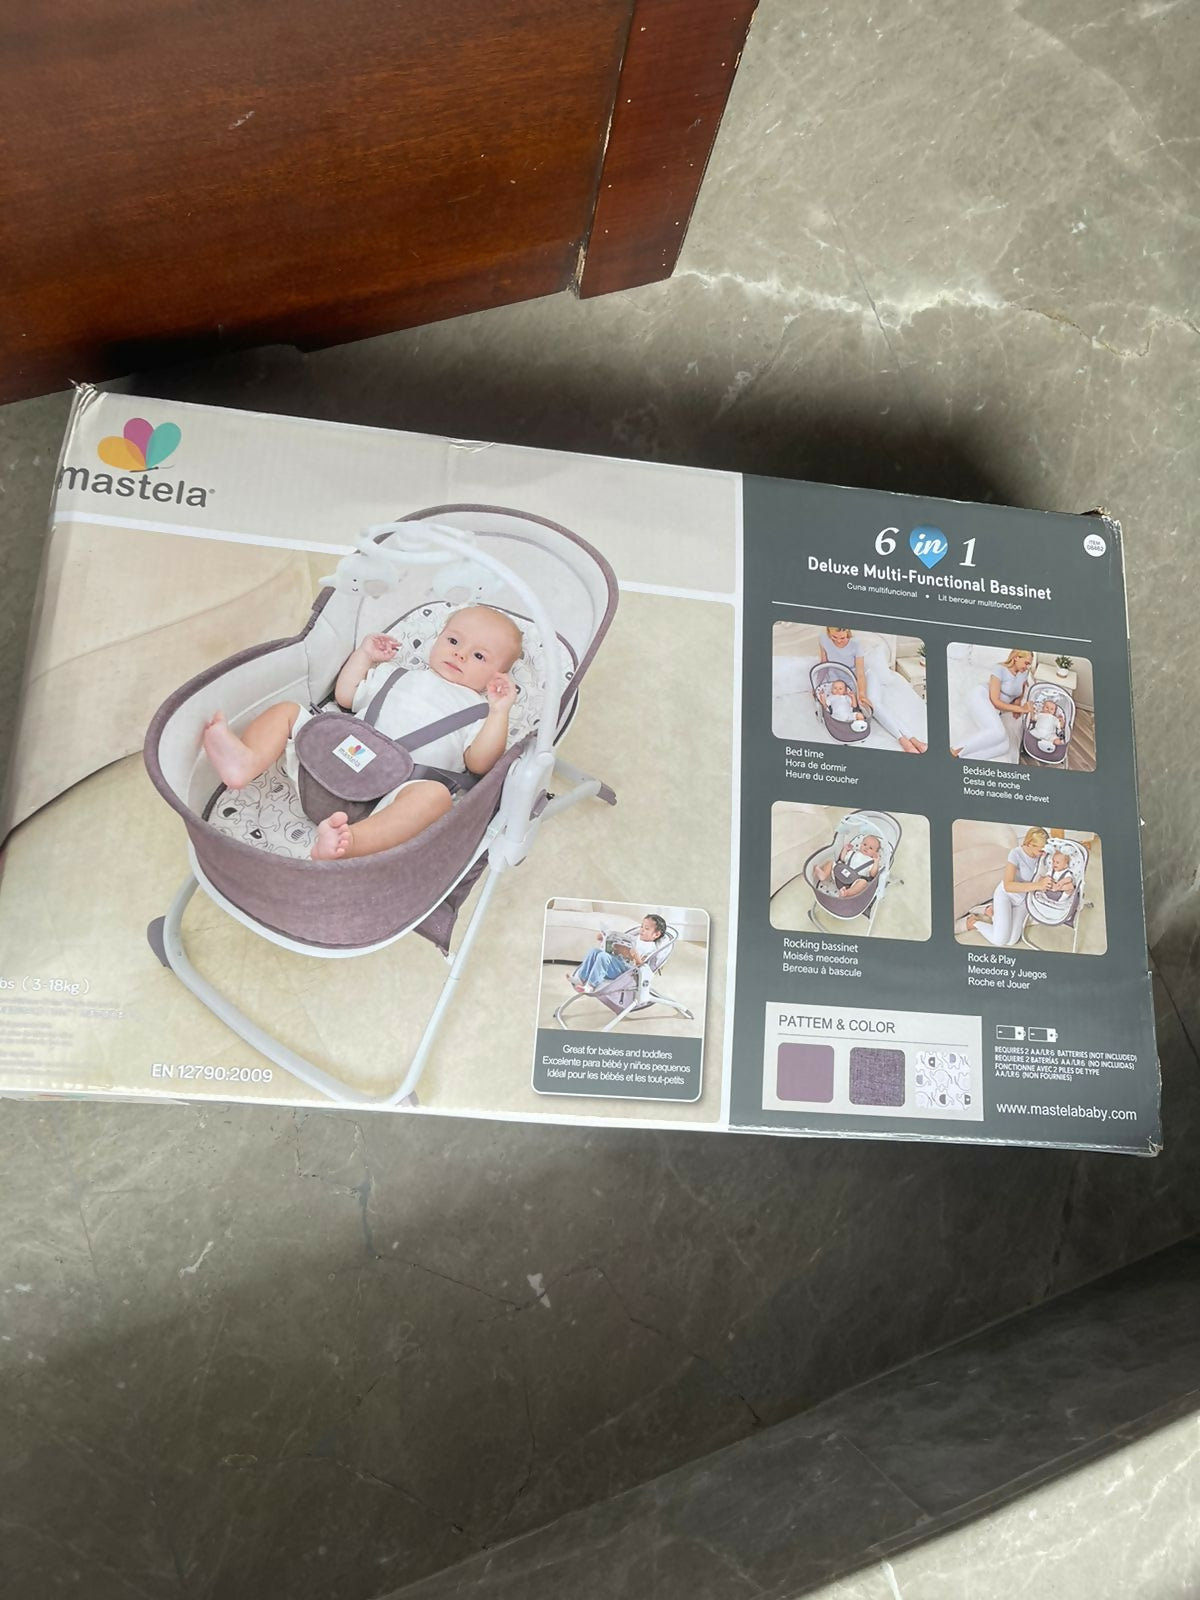 Discover the ultimate in baby sleep solutions with the MASTELA 6 In 1 Multi-functional Bassinet, offering versatility and safety for your little one's peaceful slumber.